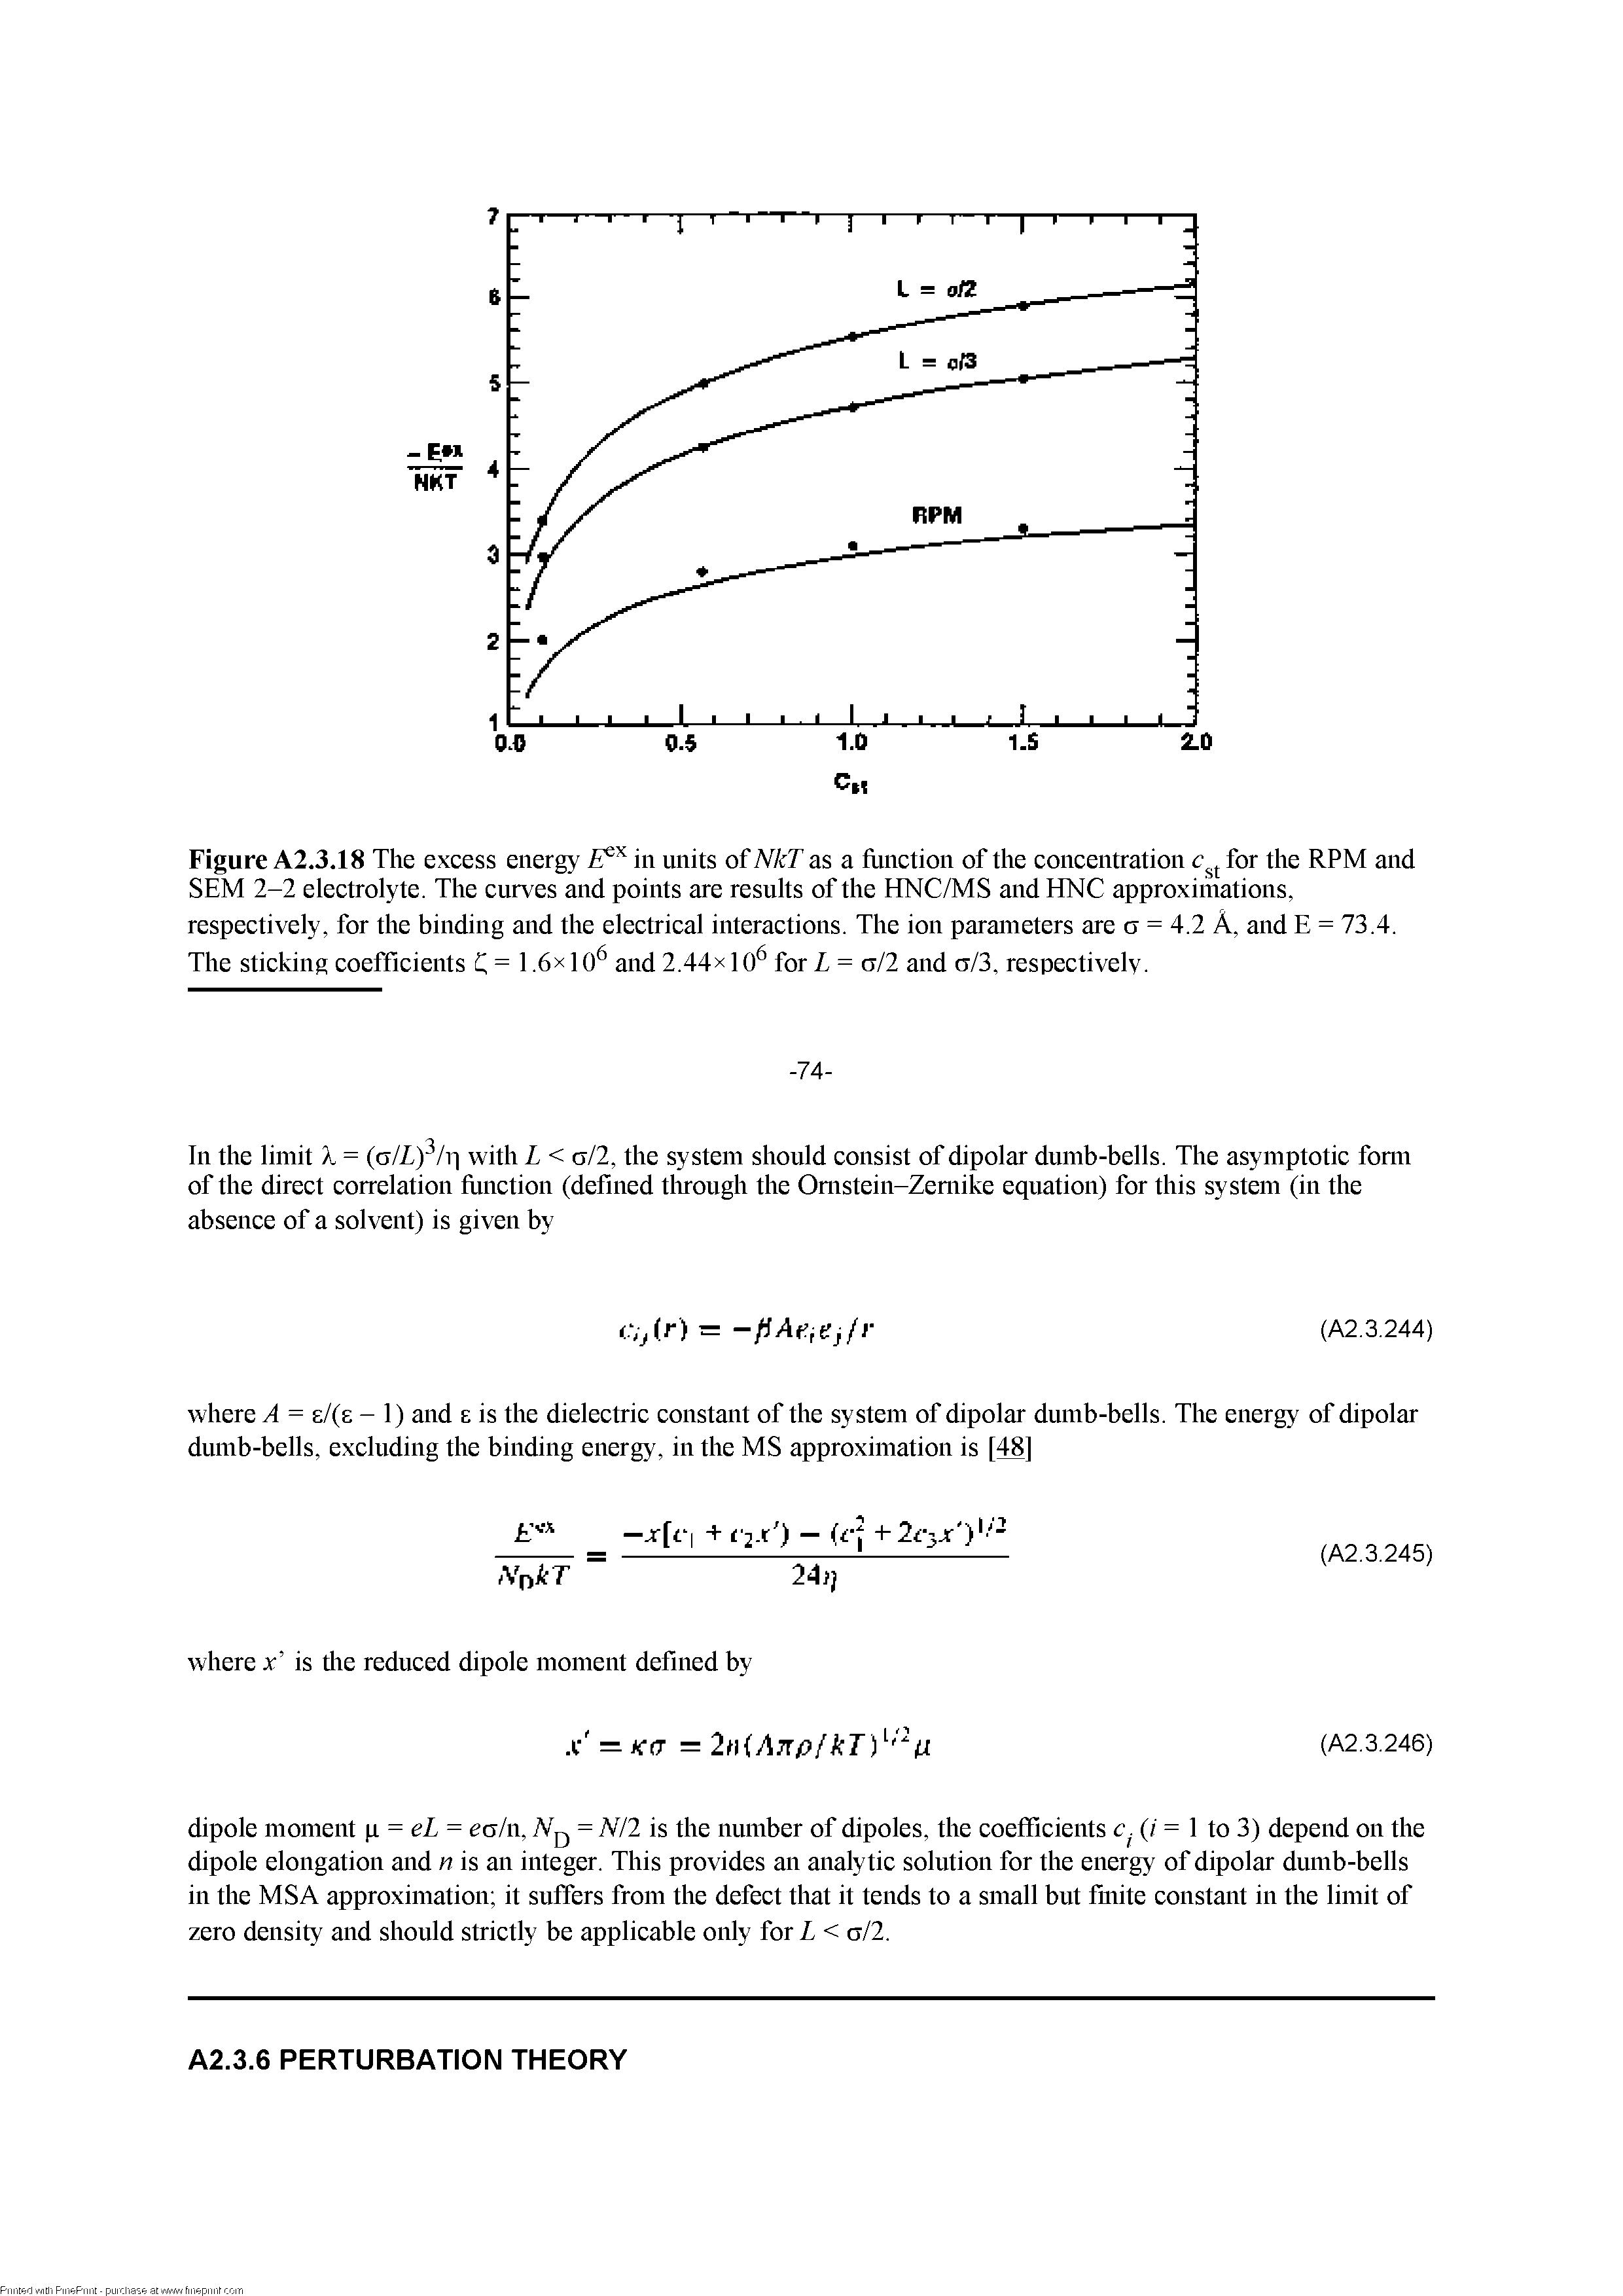 Figure A2.3.18 The excess energy in units of NkT as a fiinction of the concentration for the RPM and SEM 2-2 electrolyte. The curves and points are results of the EfNC/MS and HNC approximations, respectively, for the binding and the electrical interactions. The ion parameters are a = 4.2 A, and E = 73.4. The sticking coefficients = 1.6x10 and 2.44x 10 for L = all and a/3, respectively.